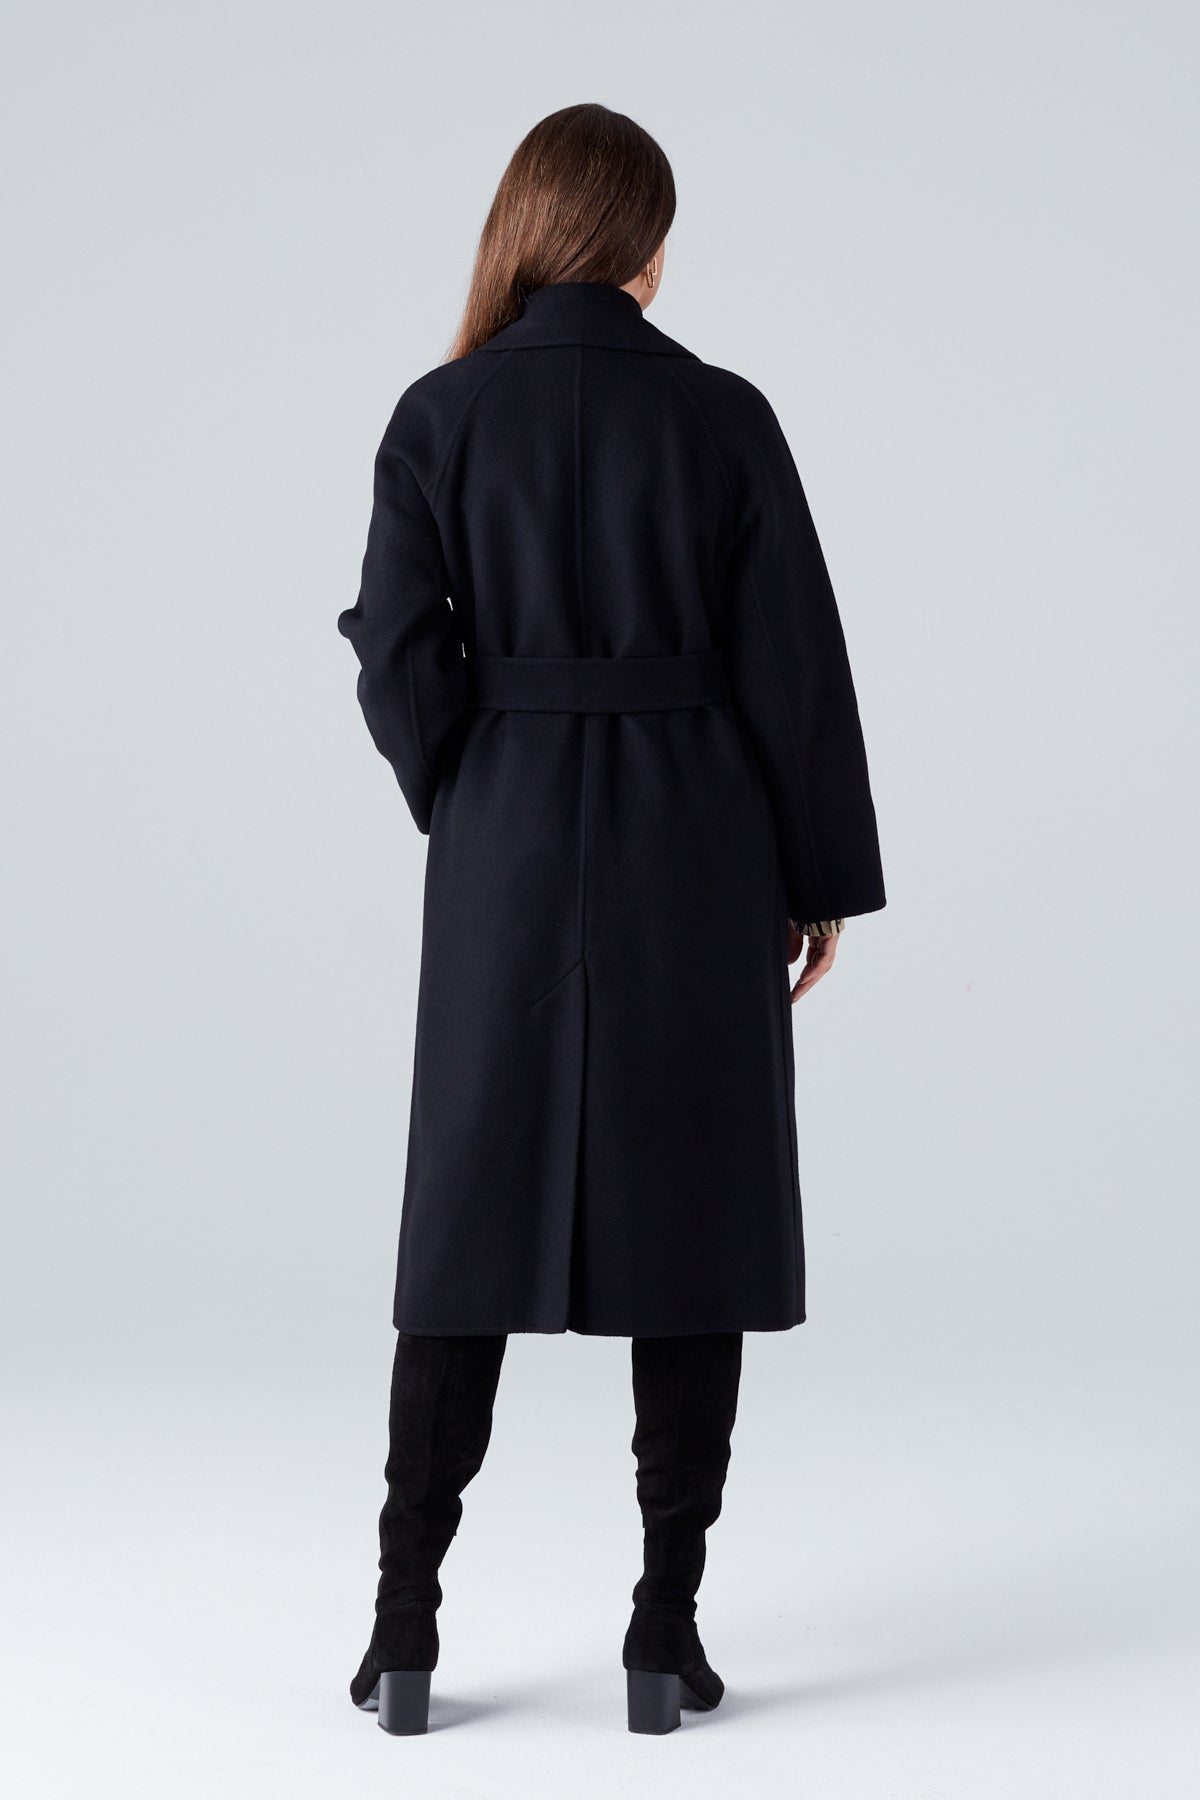 DOUBLE FACED COAT IN BLACK